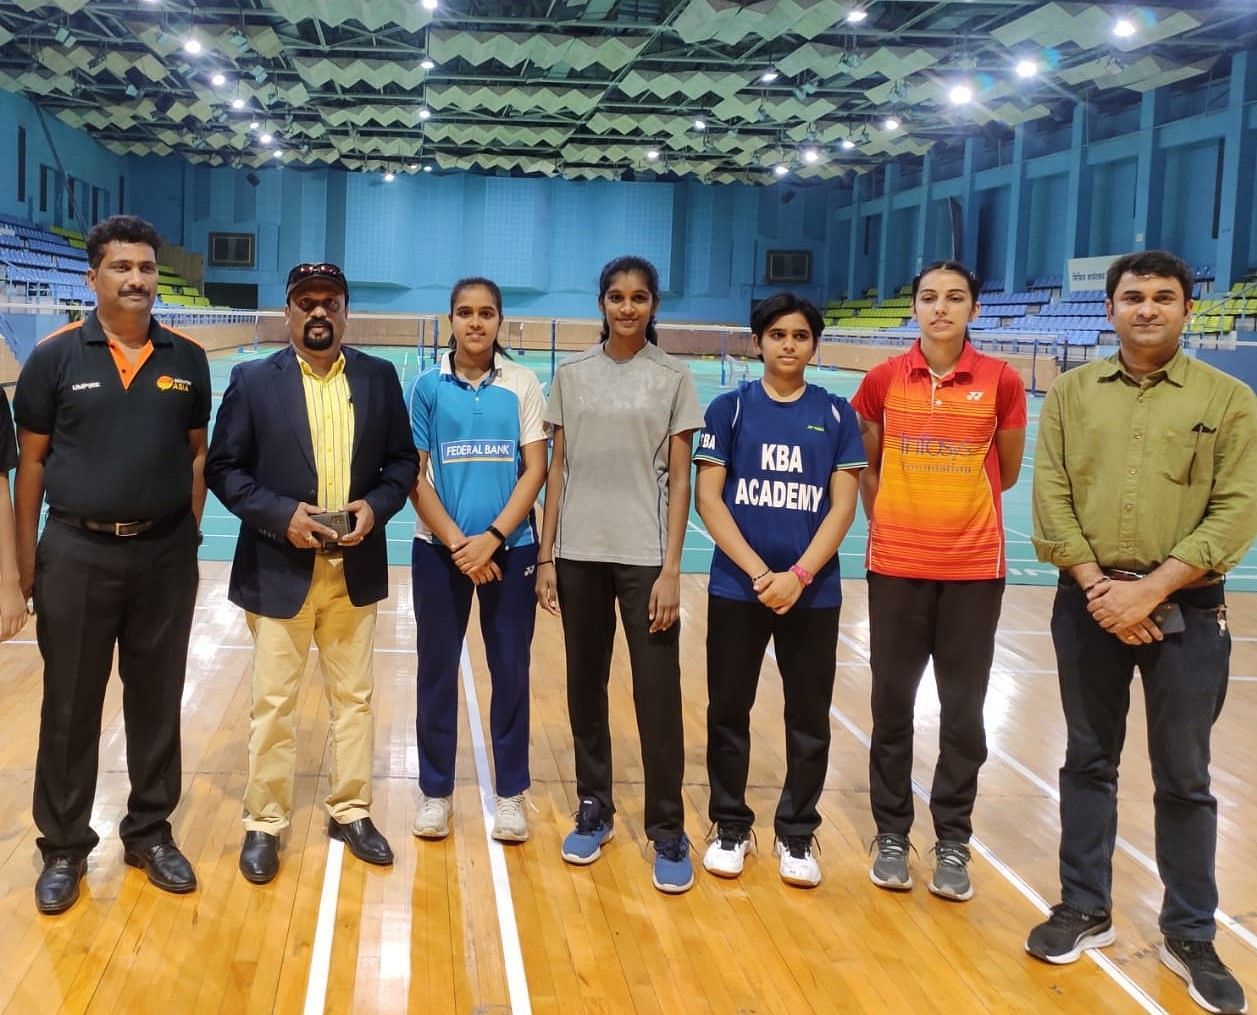 The selected Indian girls U-18 badminton team with officials after the selection trials held at the Balewadi Sports Complex in Pune. (Pic credit: DSO)